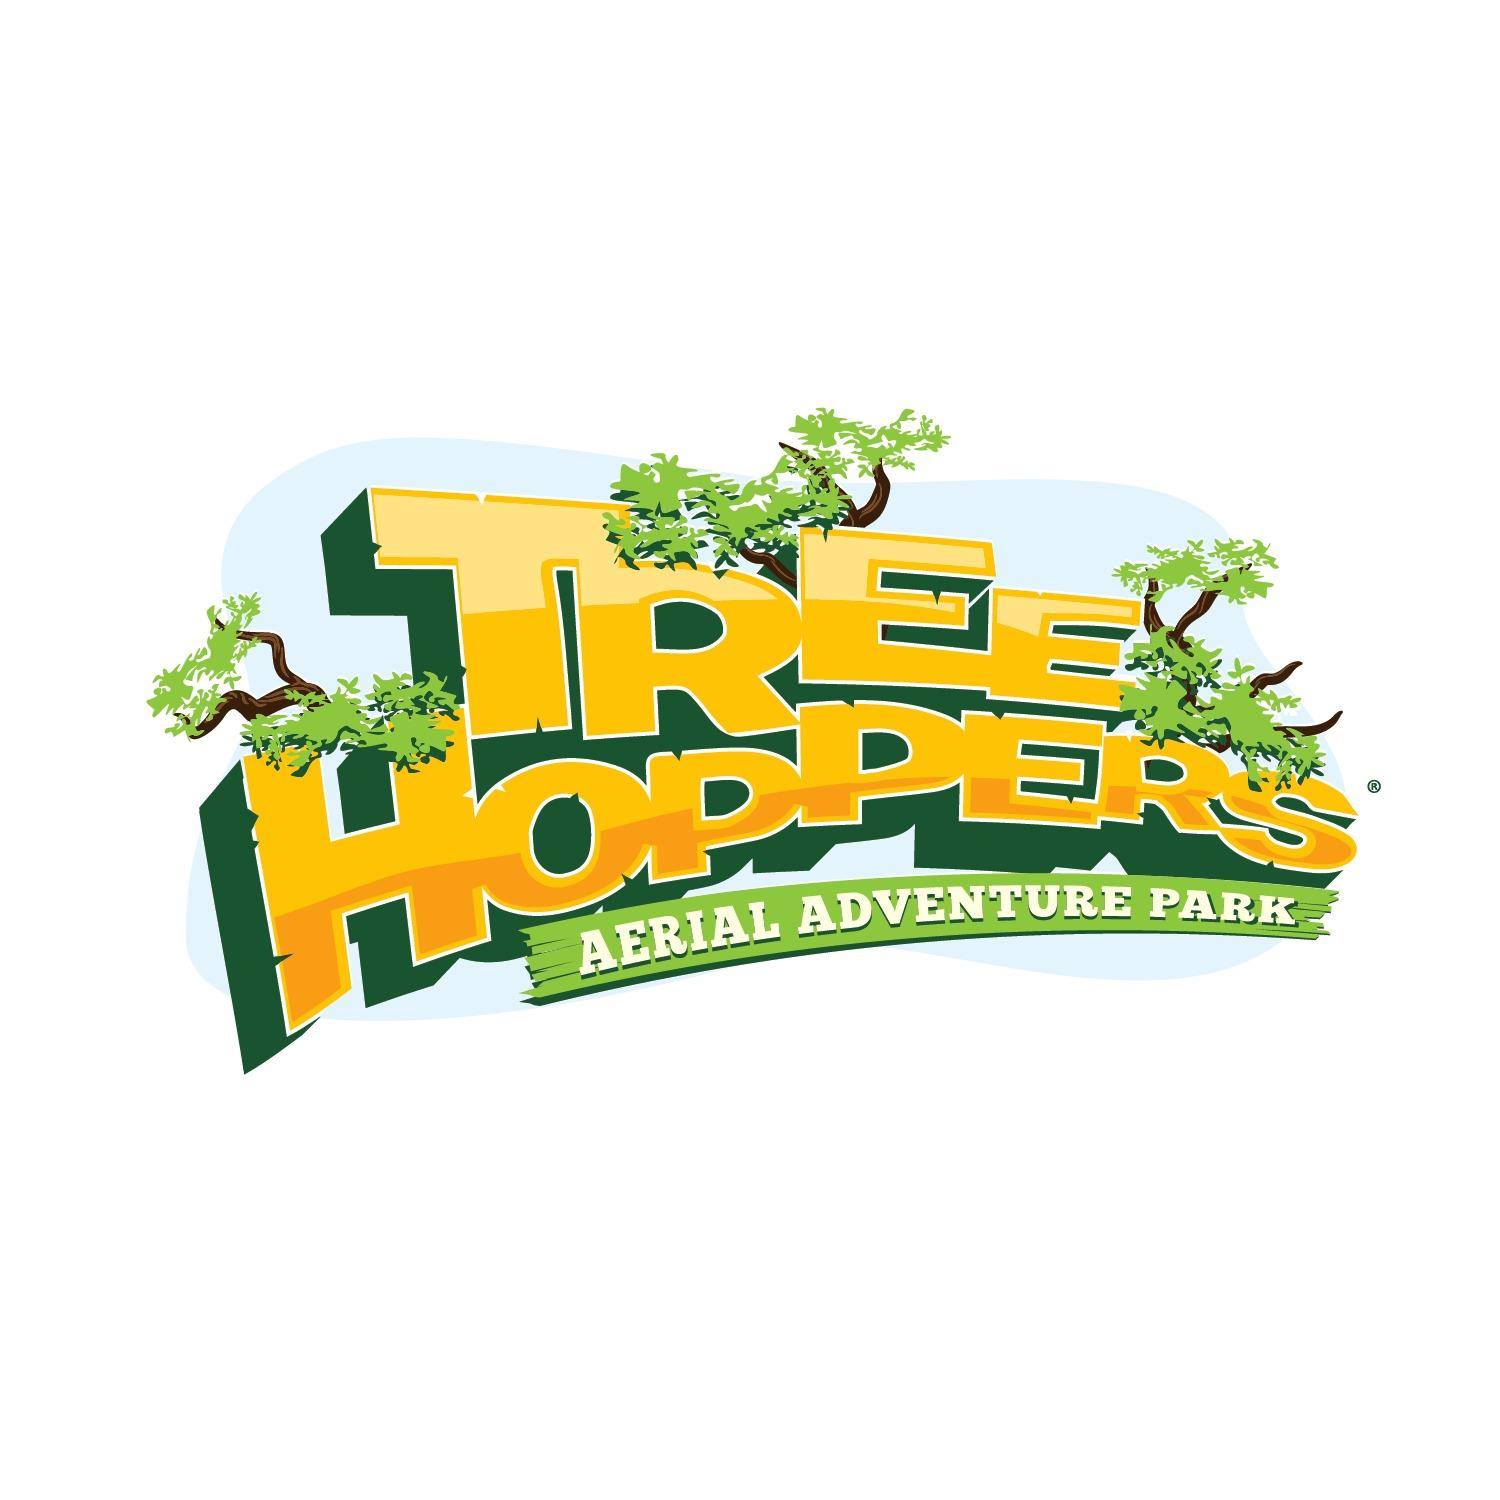 TreeHoppers Aerial Adventure Park|Zoo and Wildlife Sanctuary |Travel